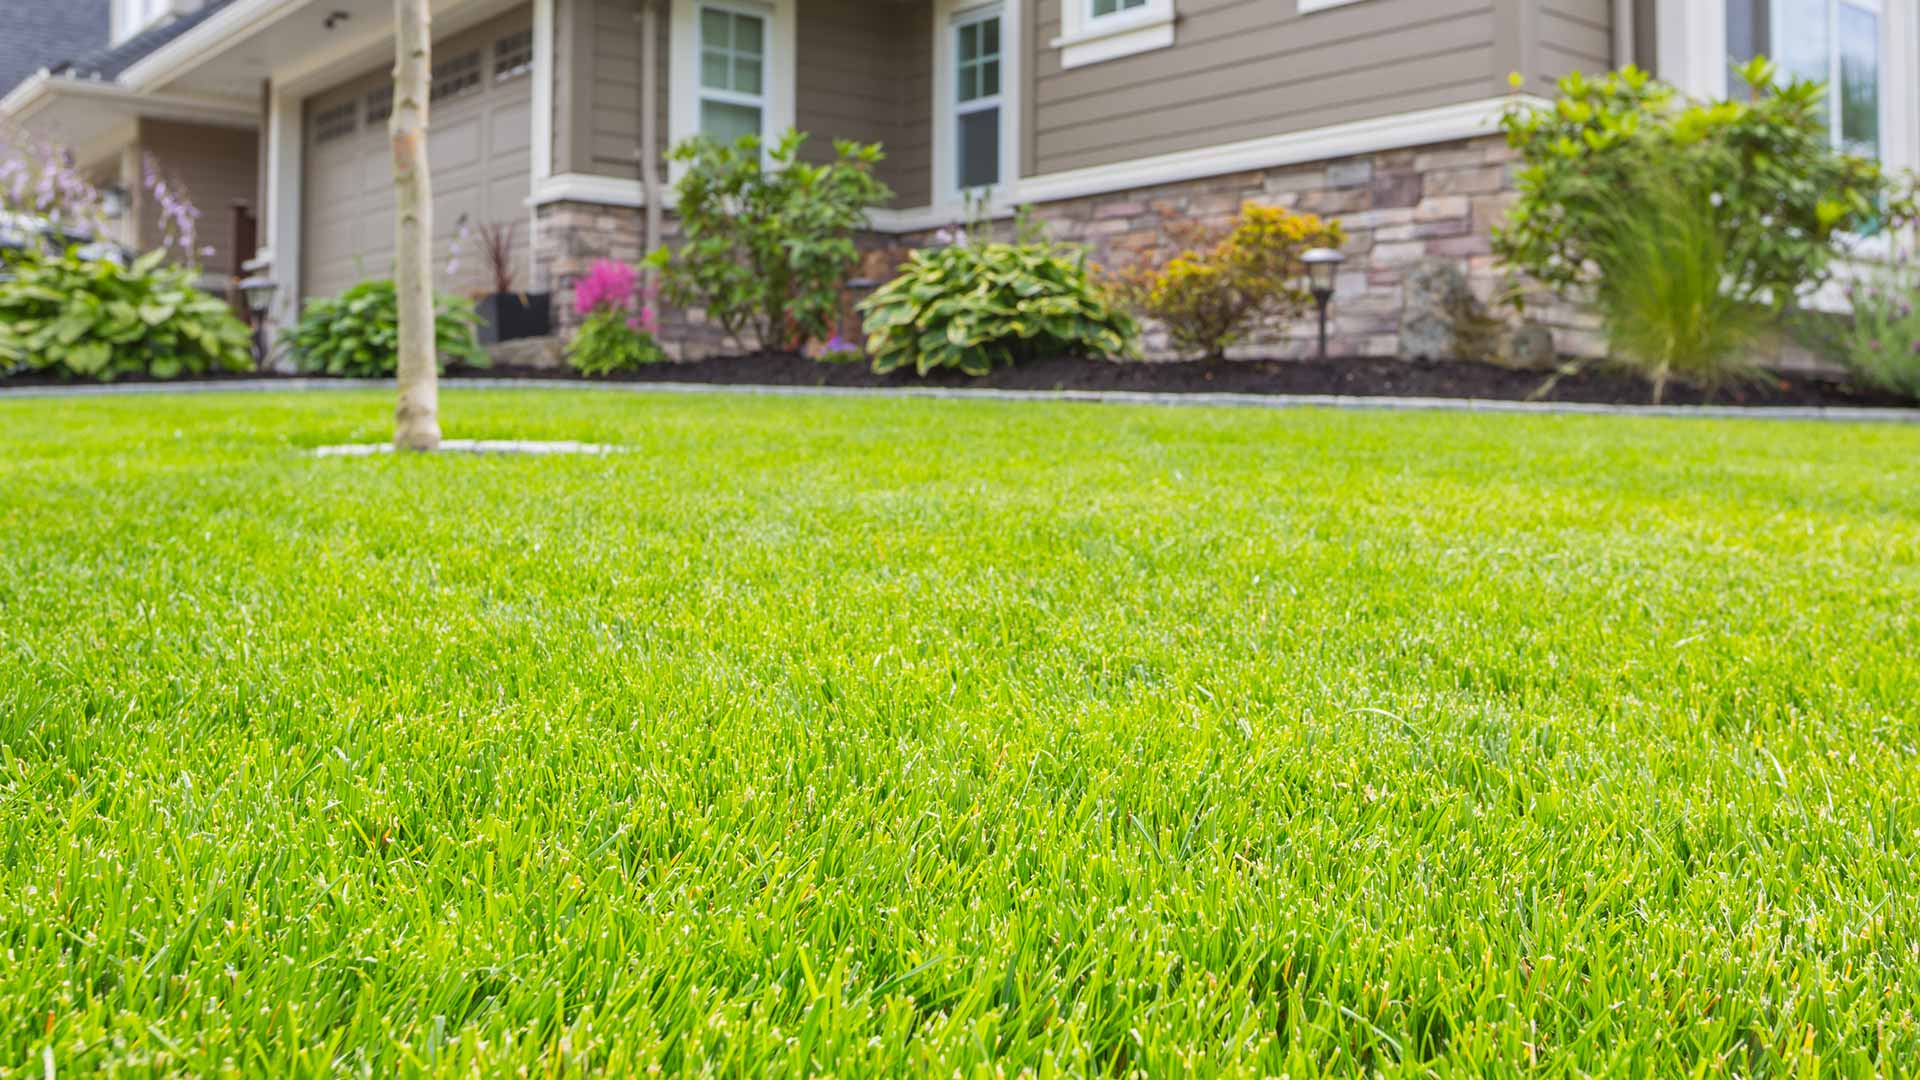 Want a Healthy & Beautiful Lawn? Invest in Fertilization & Weed Control!